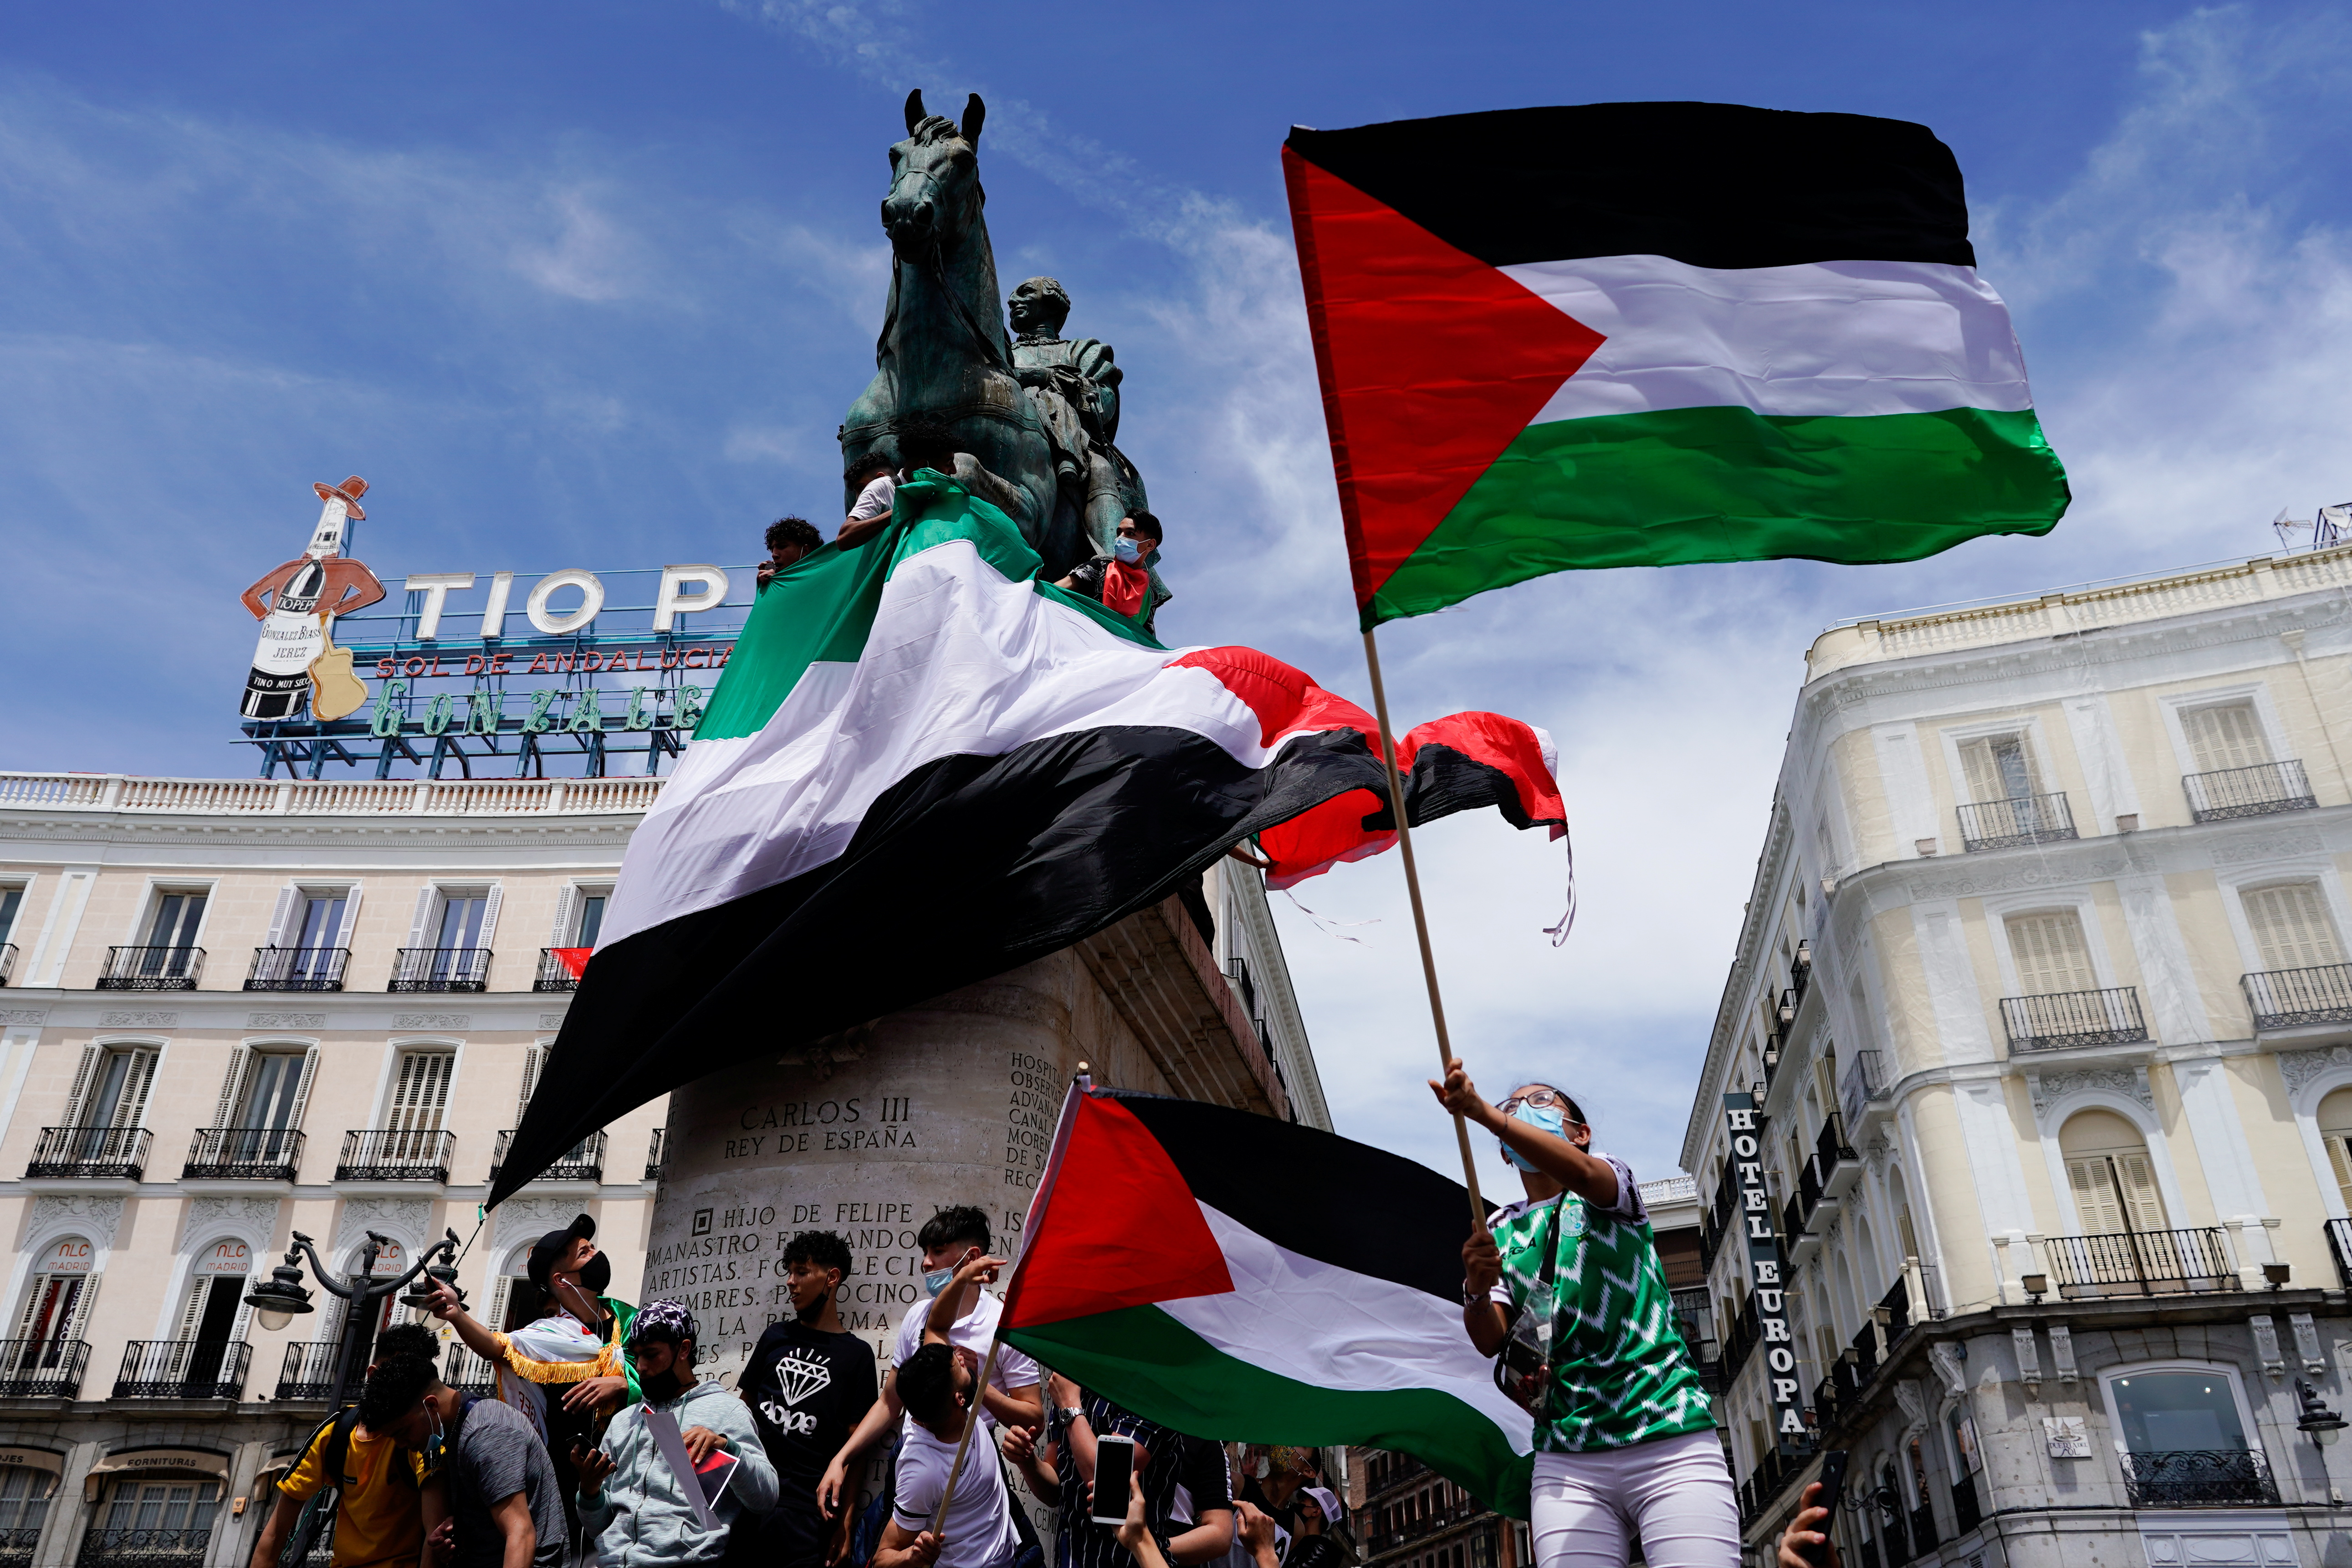 Protest in support of Palestine, in Madrid